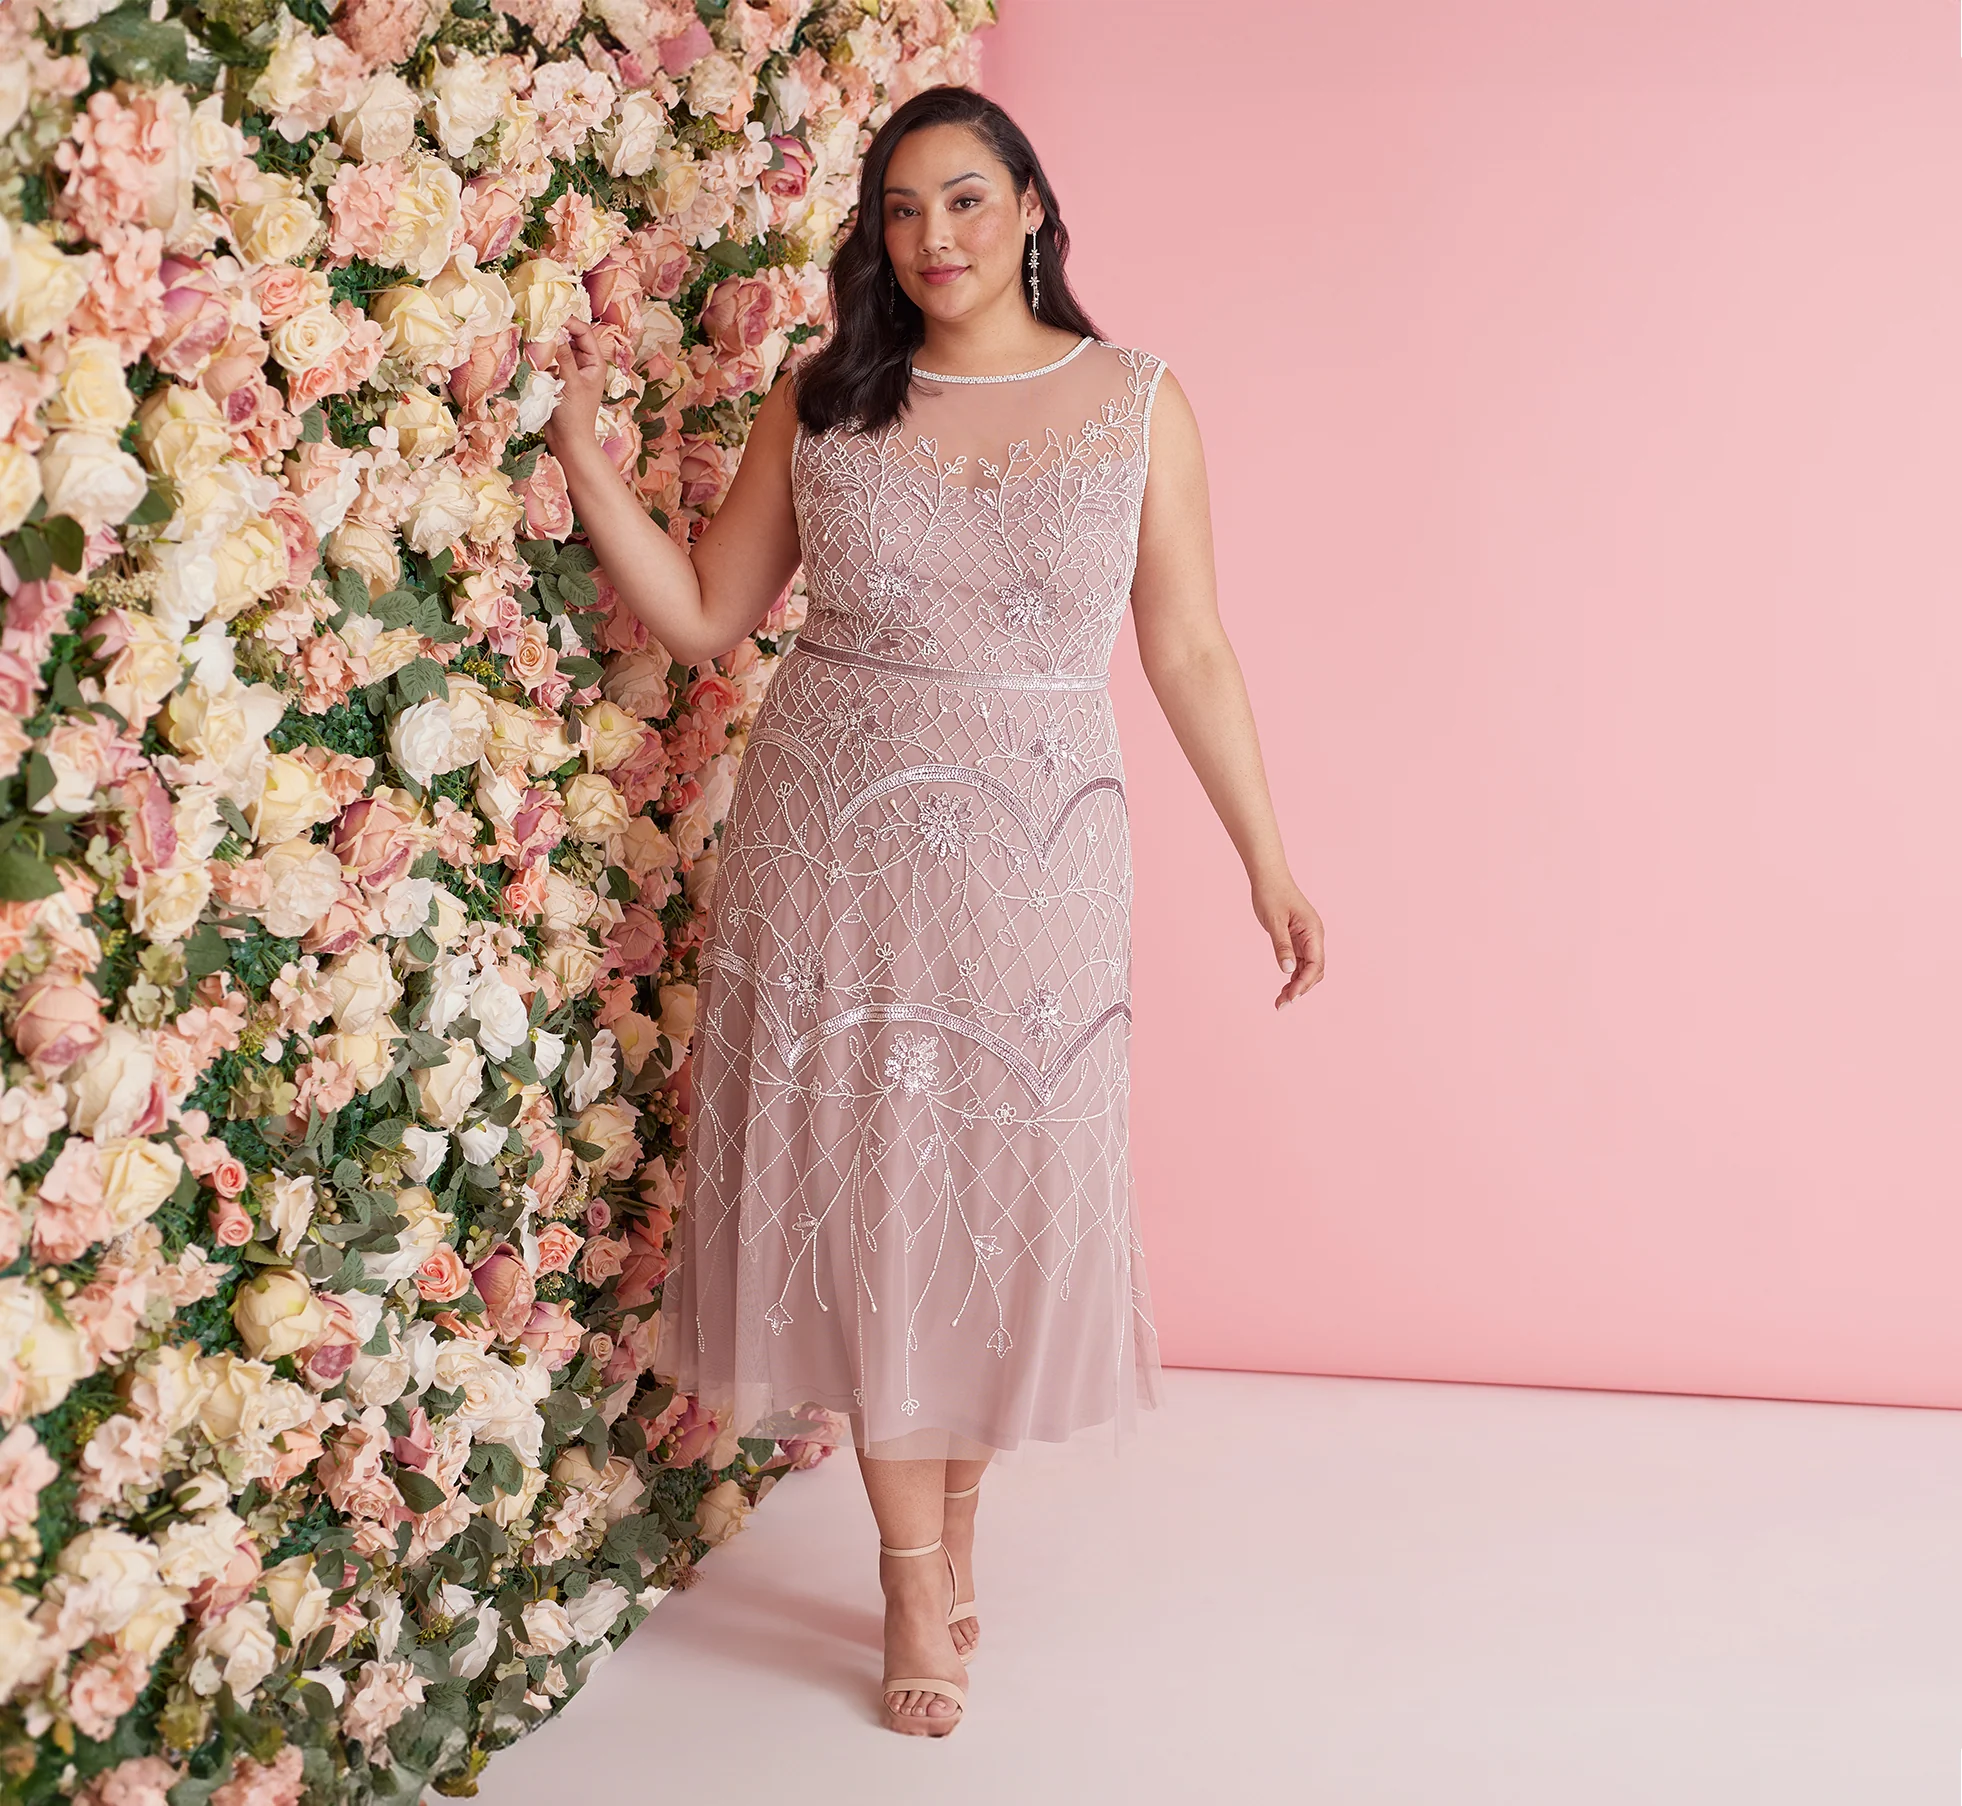 PLUS SIZE BEADED ANKLE-LENGTH DRESS WITH SHEER NECKLINE IN DUSTED PETAL IVORY